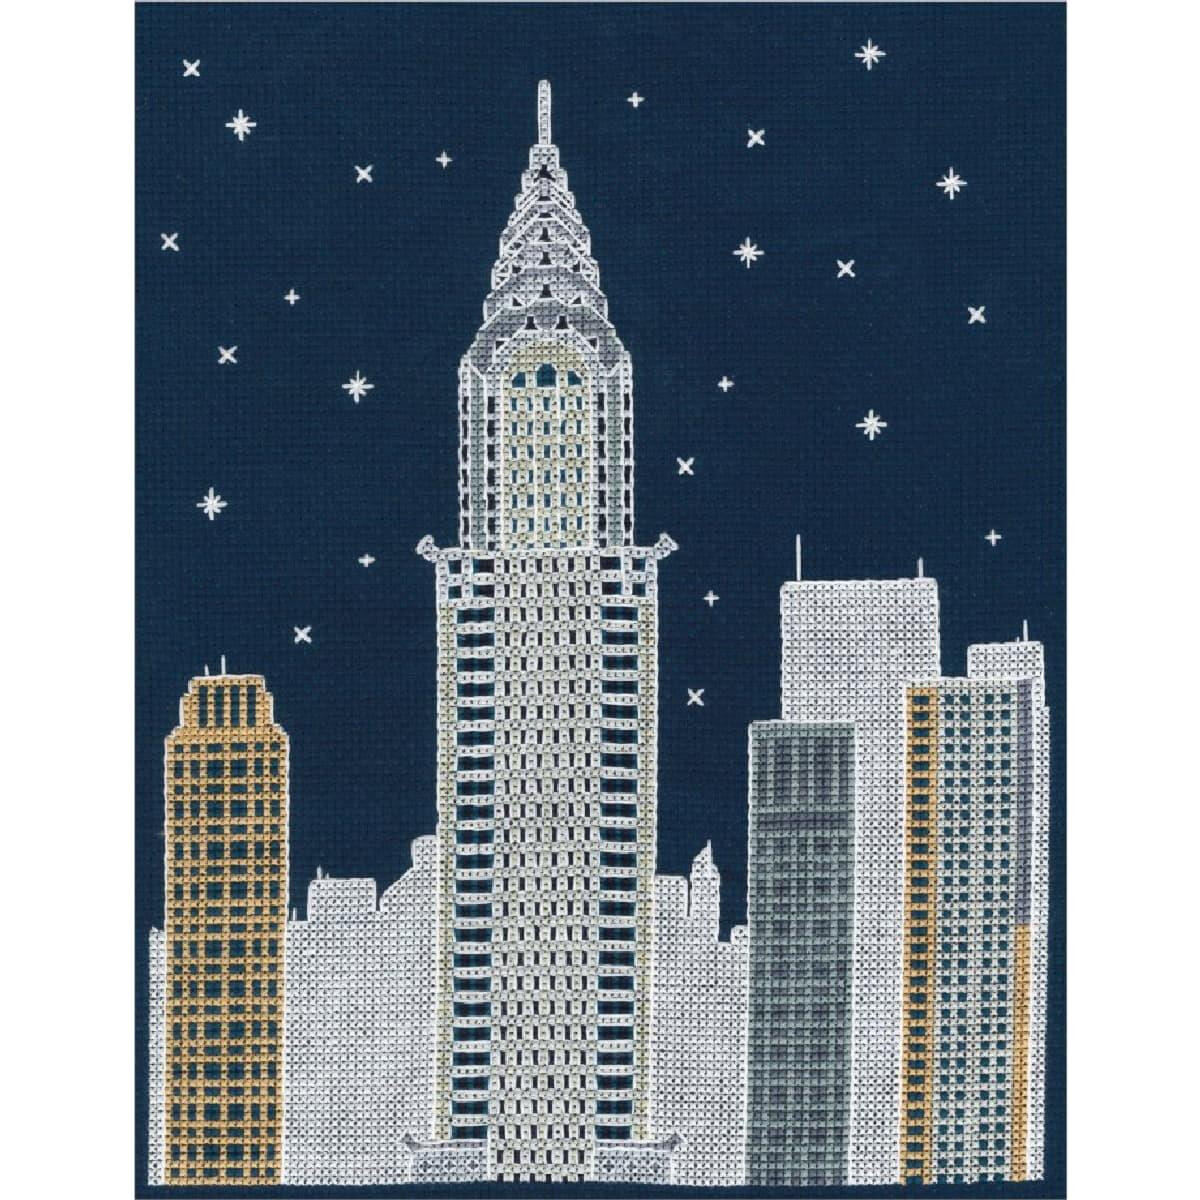 DMC counted cross stitch kit "New York by...